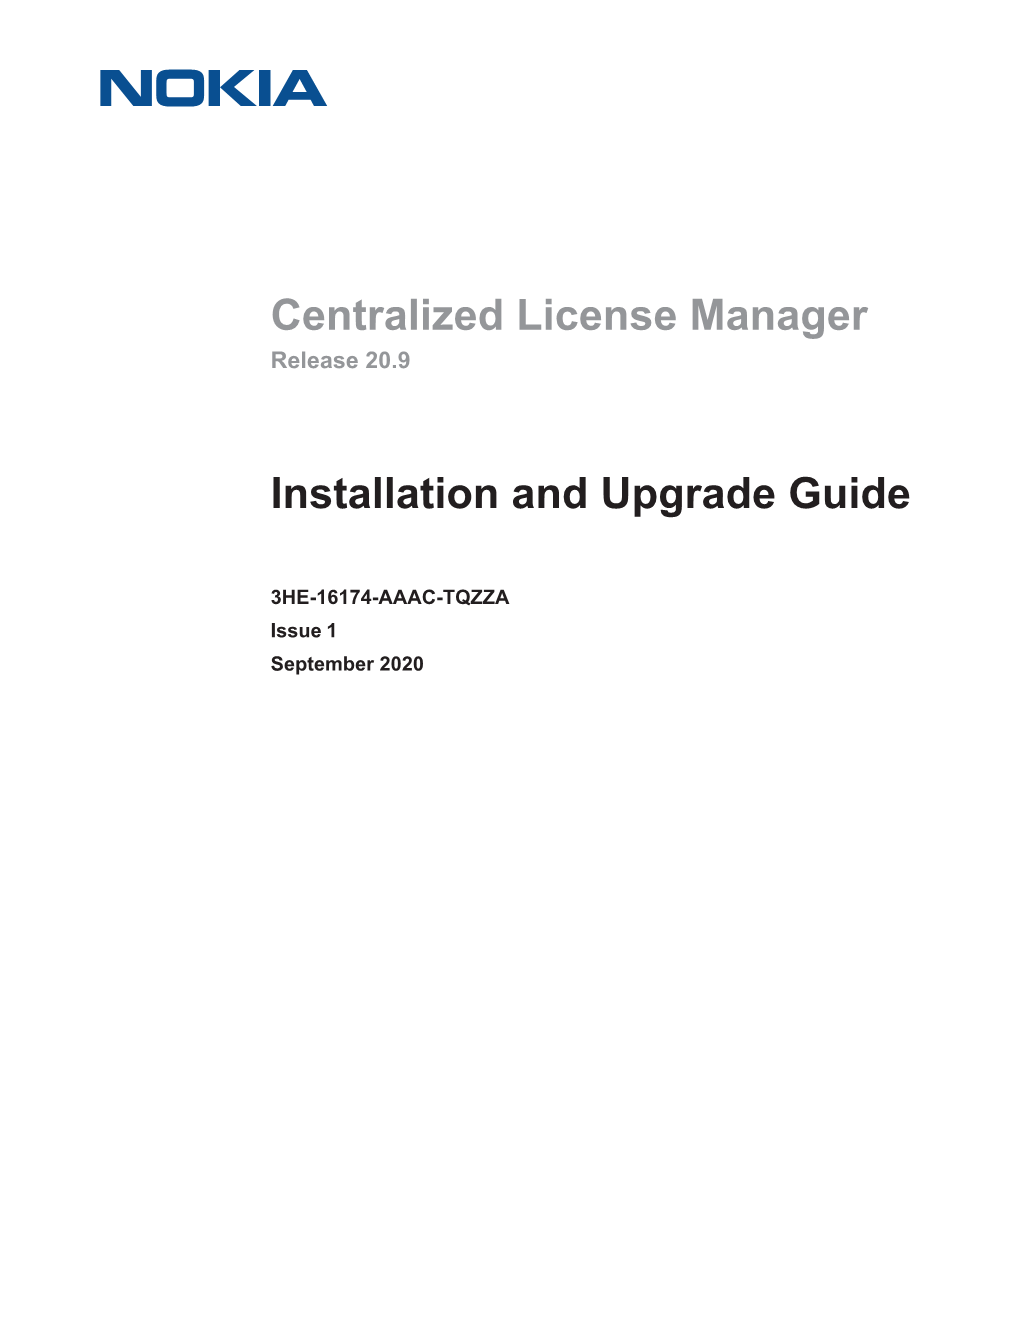 Centralized License Manager Release 20.9 Installation And